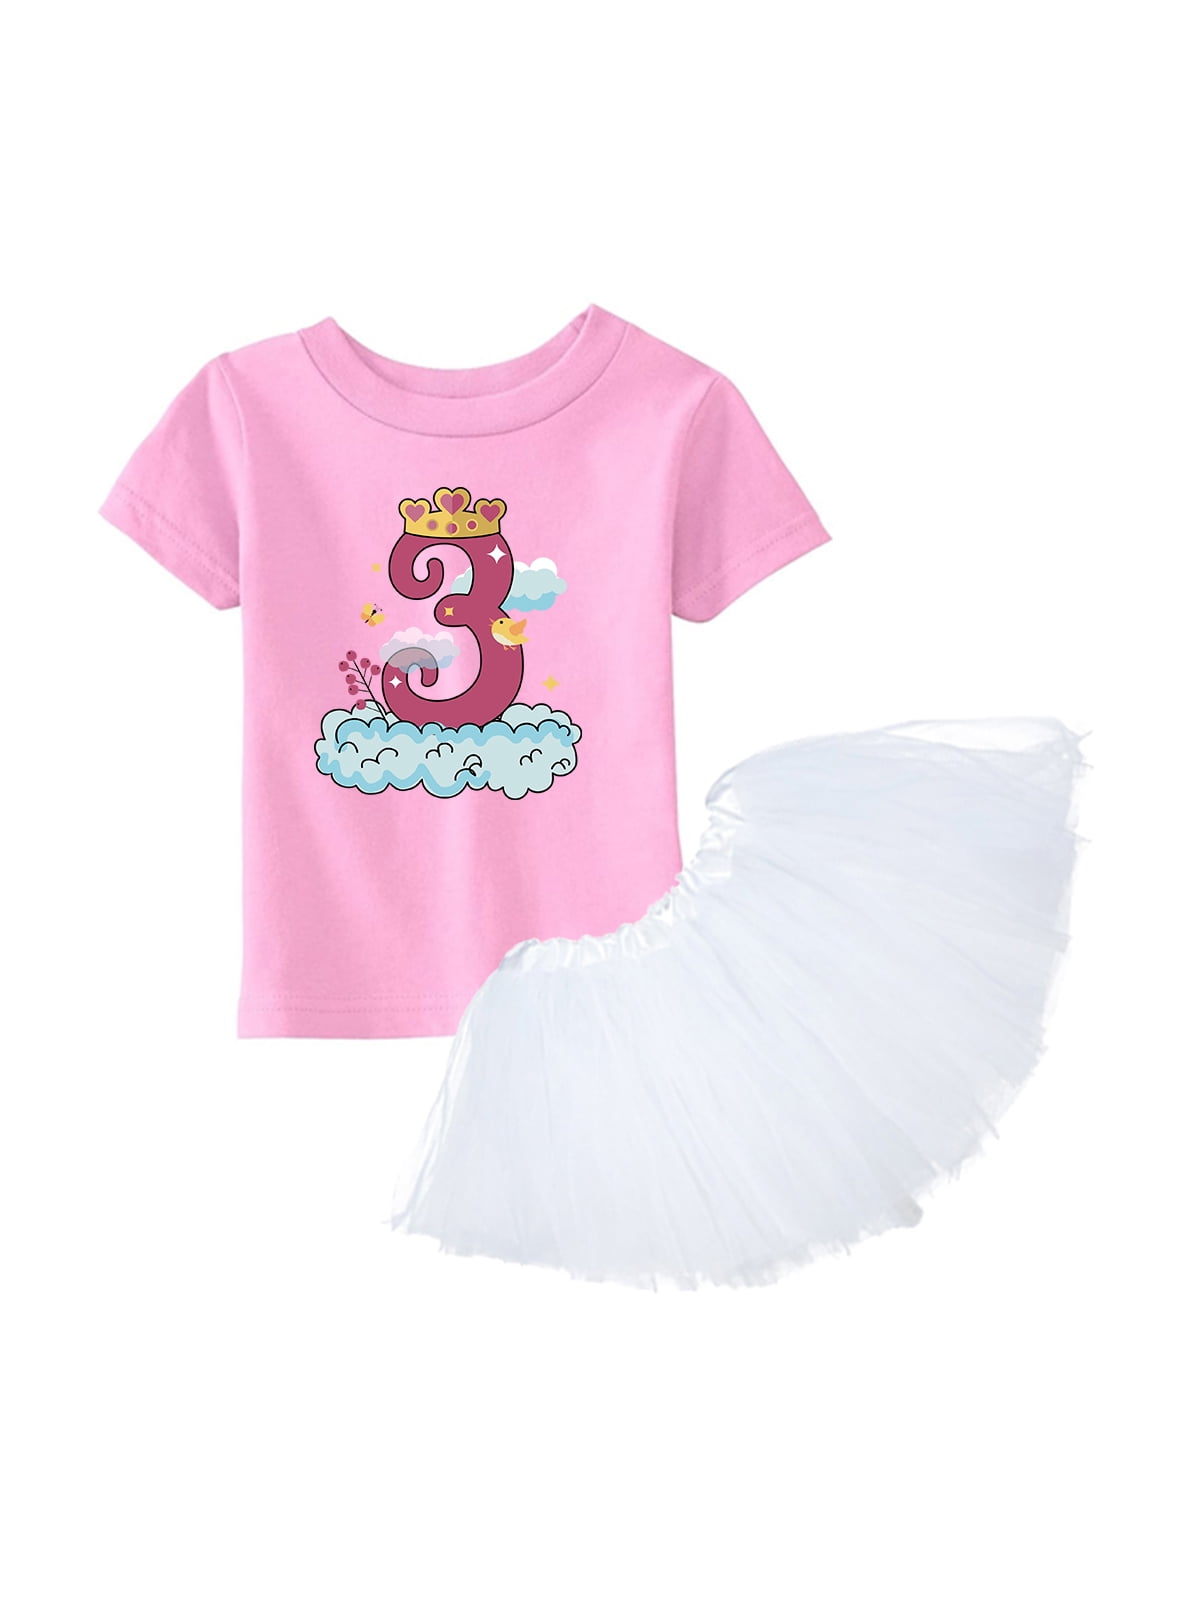 princess birthday outfits for 3 year old